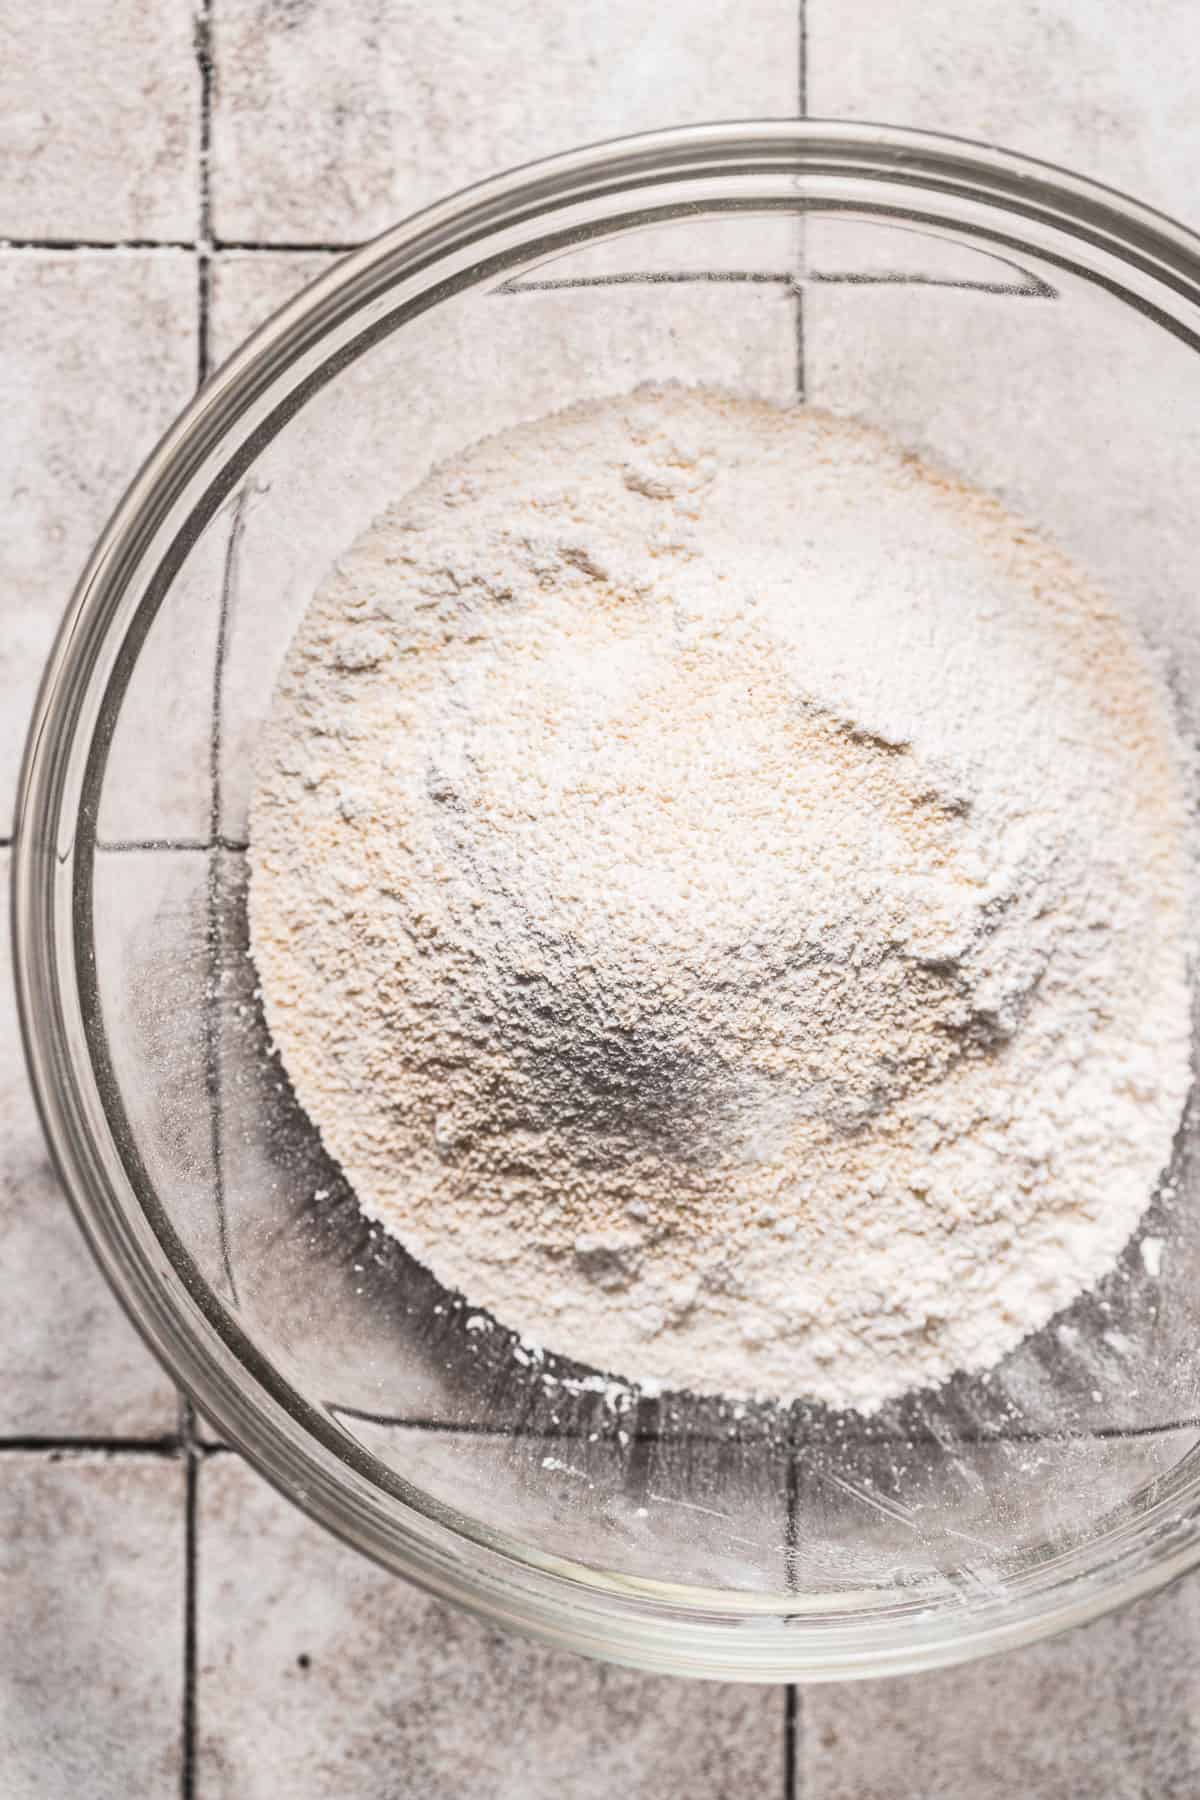 powdered sugar and almond flour in glass bowl.